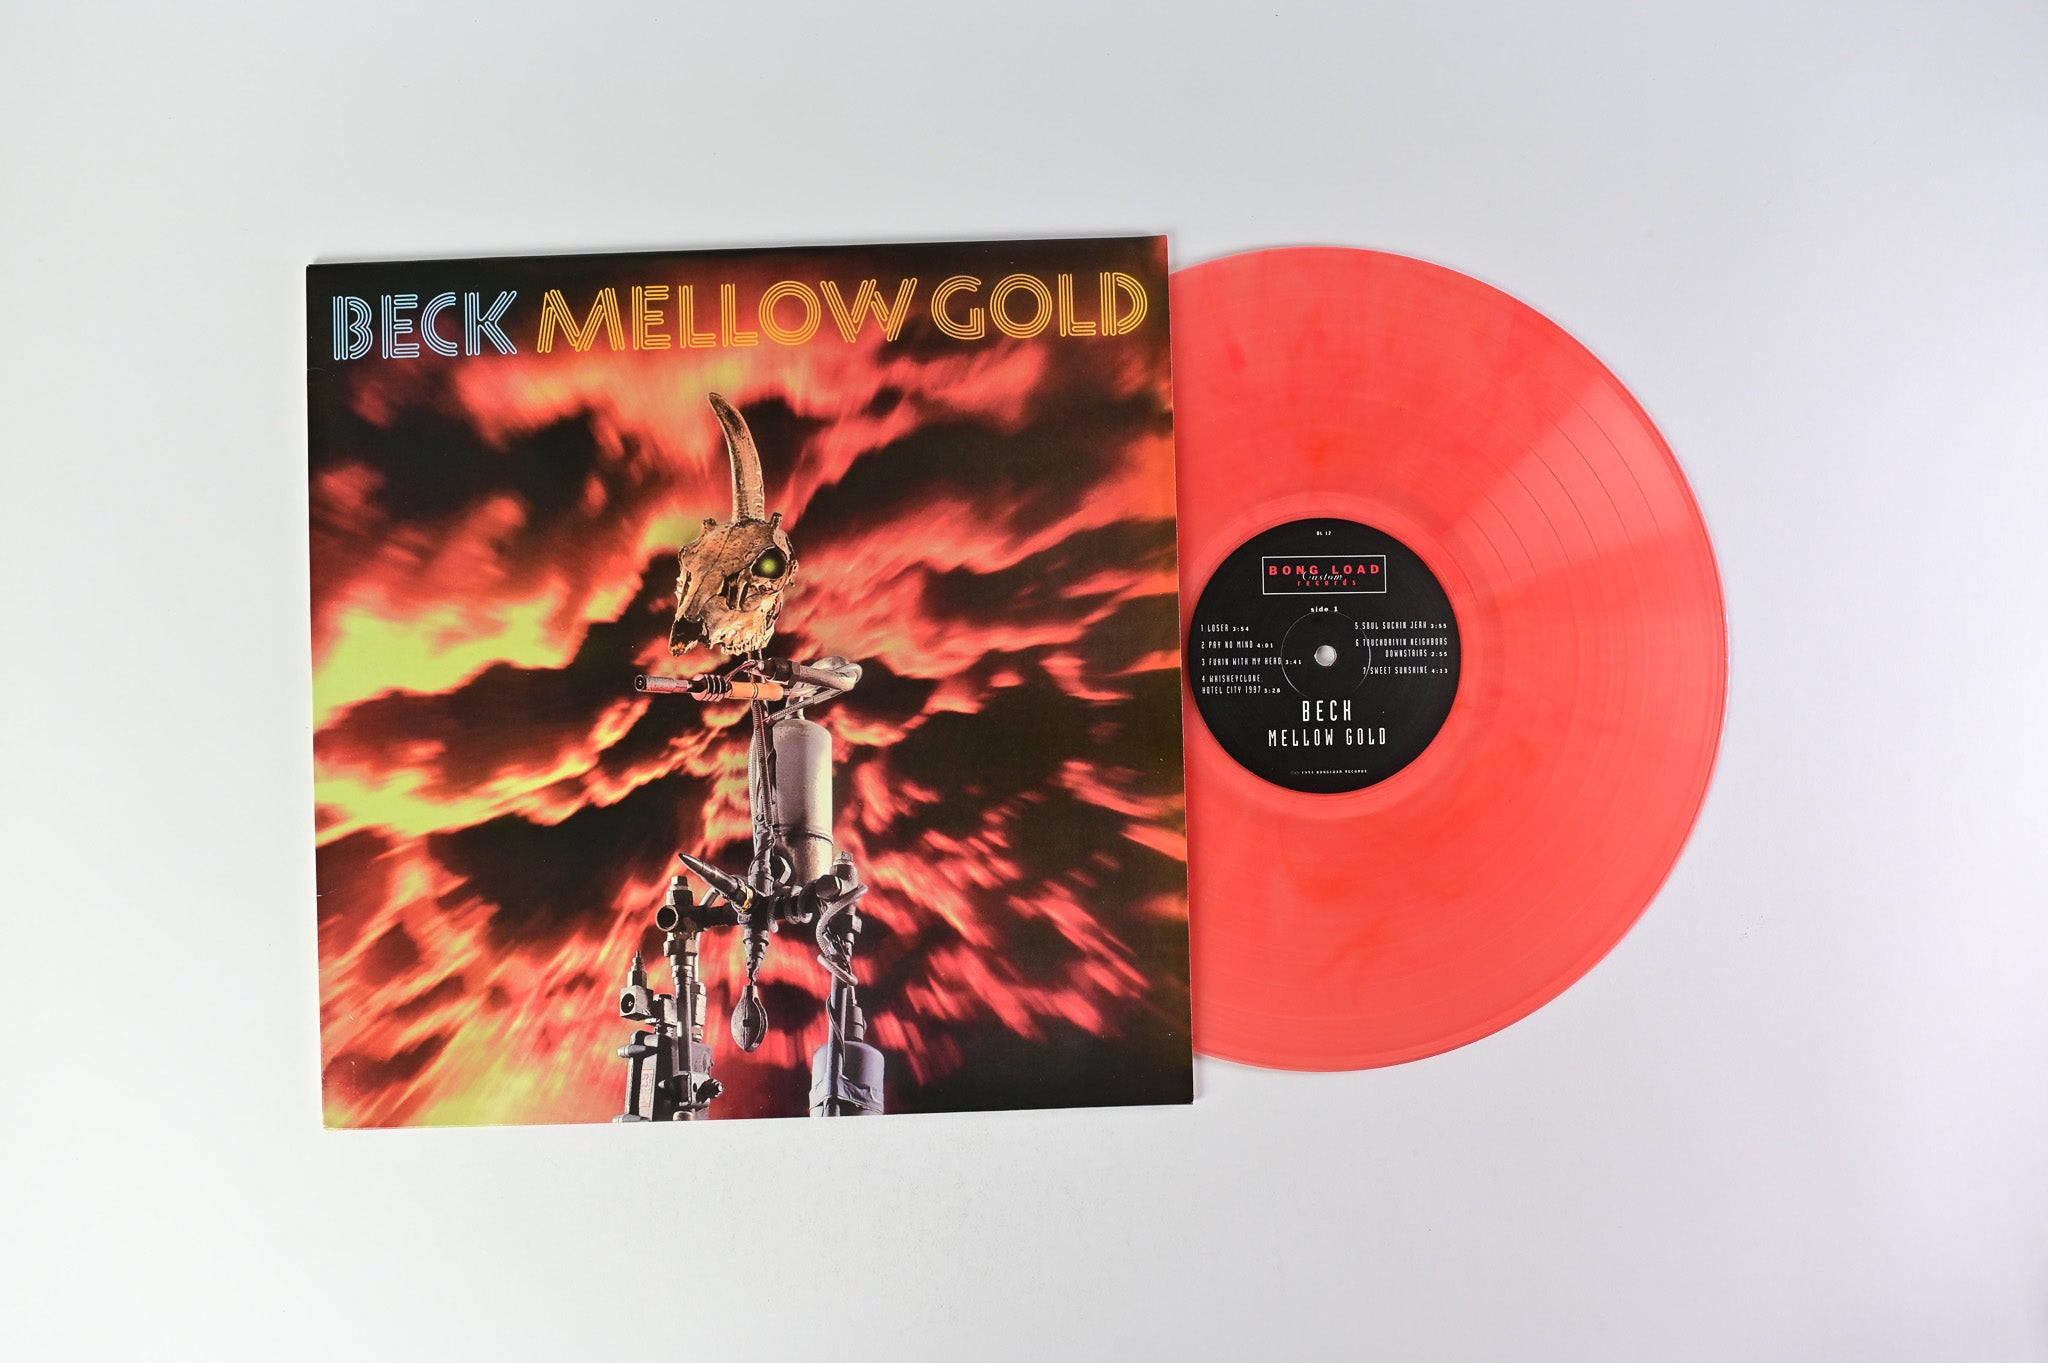 Beck - Mellow Gold on Bong Load Pink Translucent Unofficial